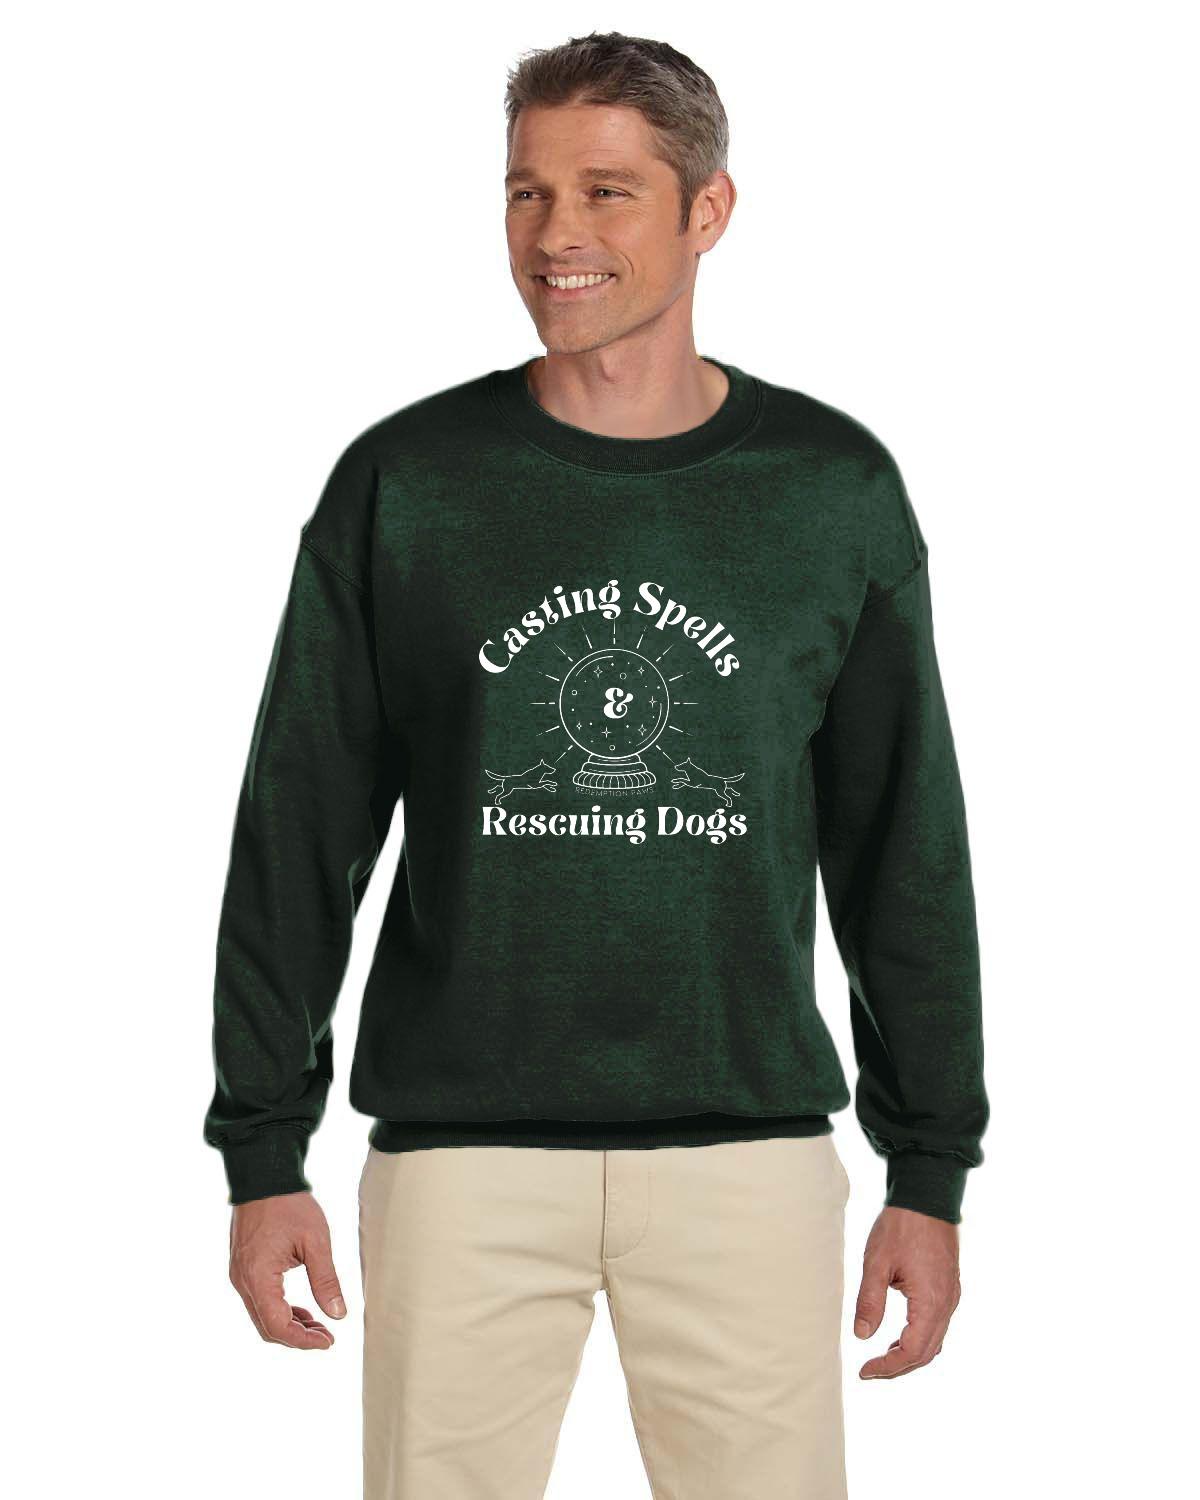 Casting Spells and Rescuing Dogs Crystal Ball Sweatshirt